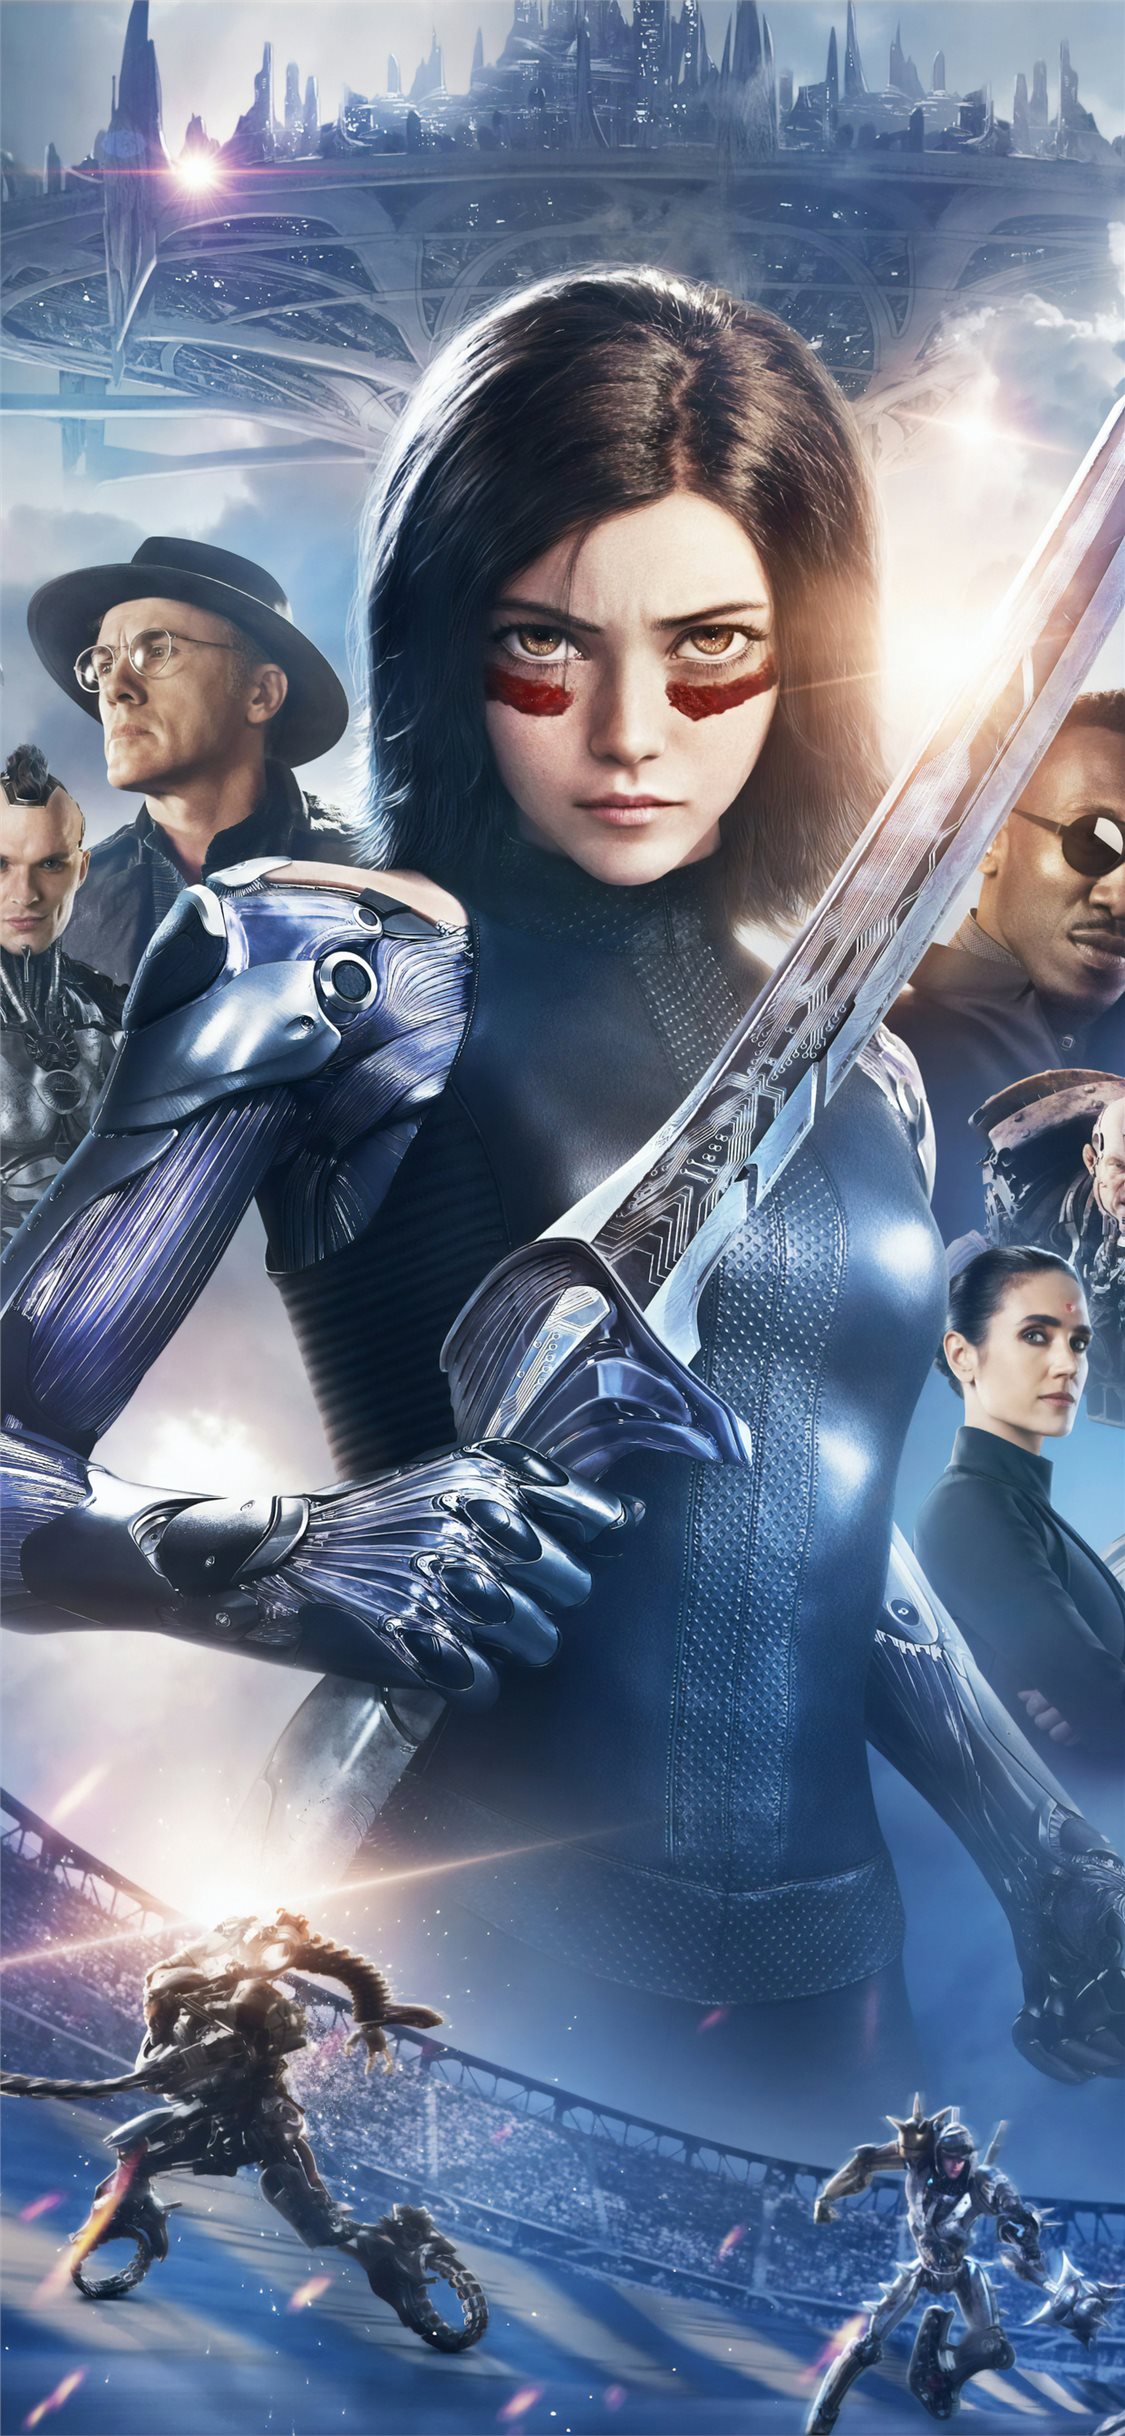 the alita battle angel 4k new 2019 iPhone X Wallpapers Free Download